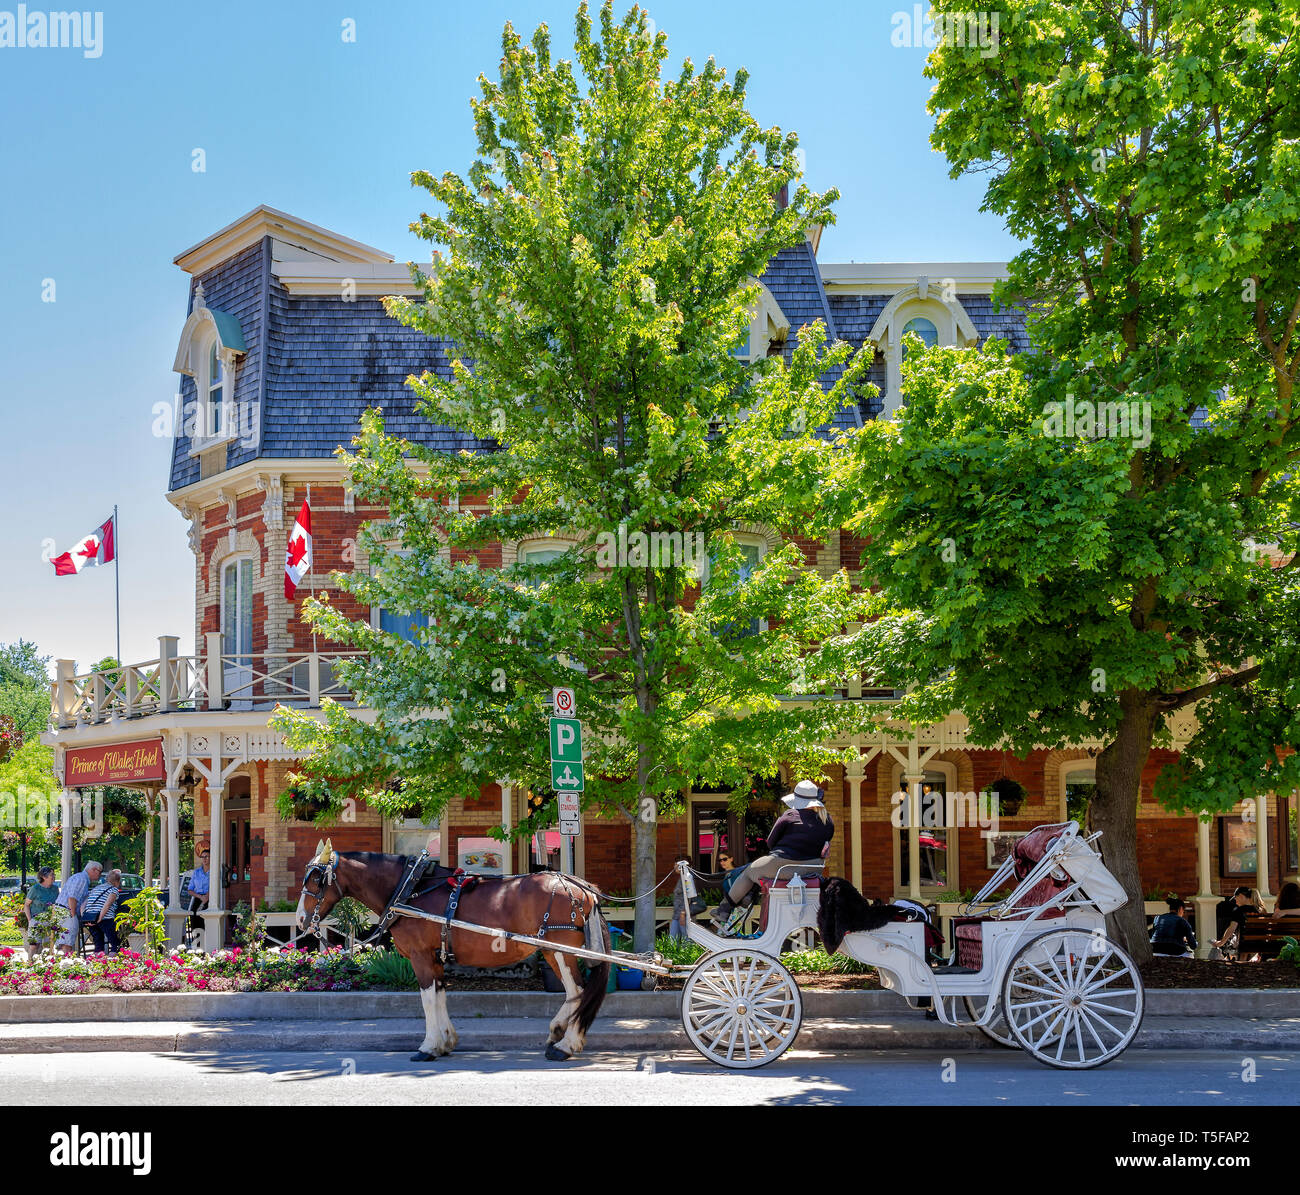 NIiagara on the lake, Ontario - June 14, 2018: The Historic Prince of Wales Hotel in Niagara On The Lake, Ontario, Canada is a three story hotel with  Stock Photo